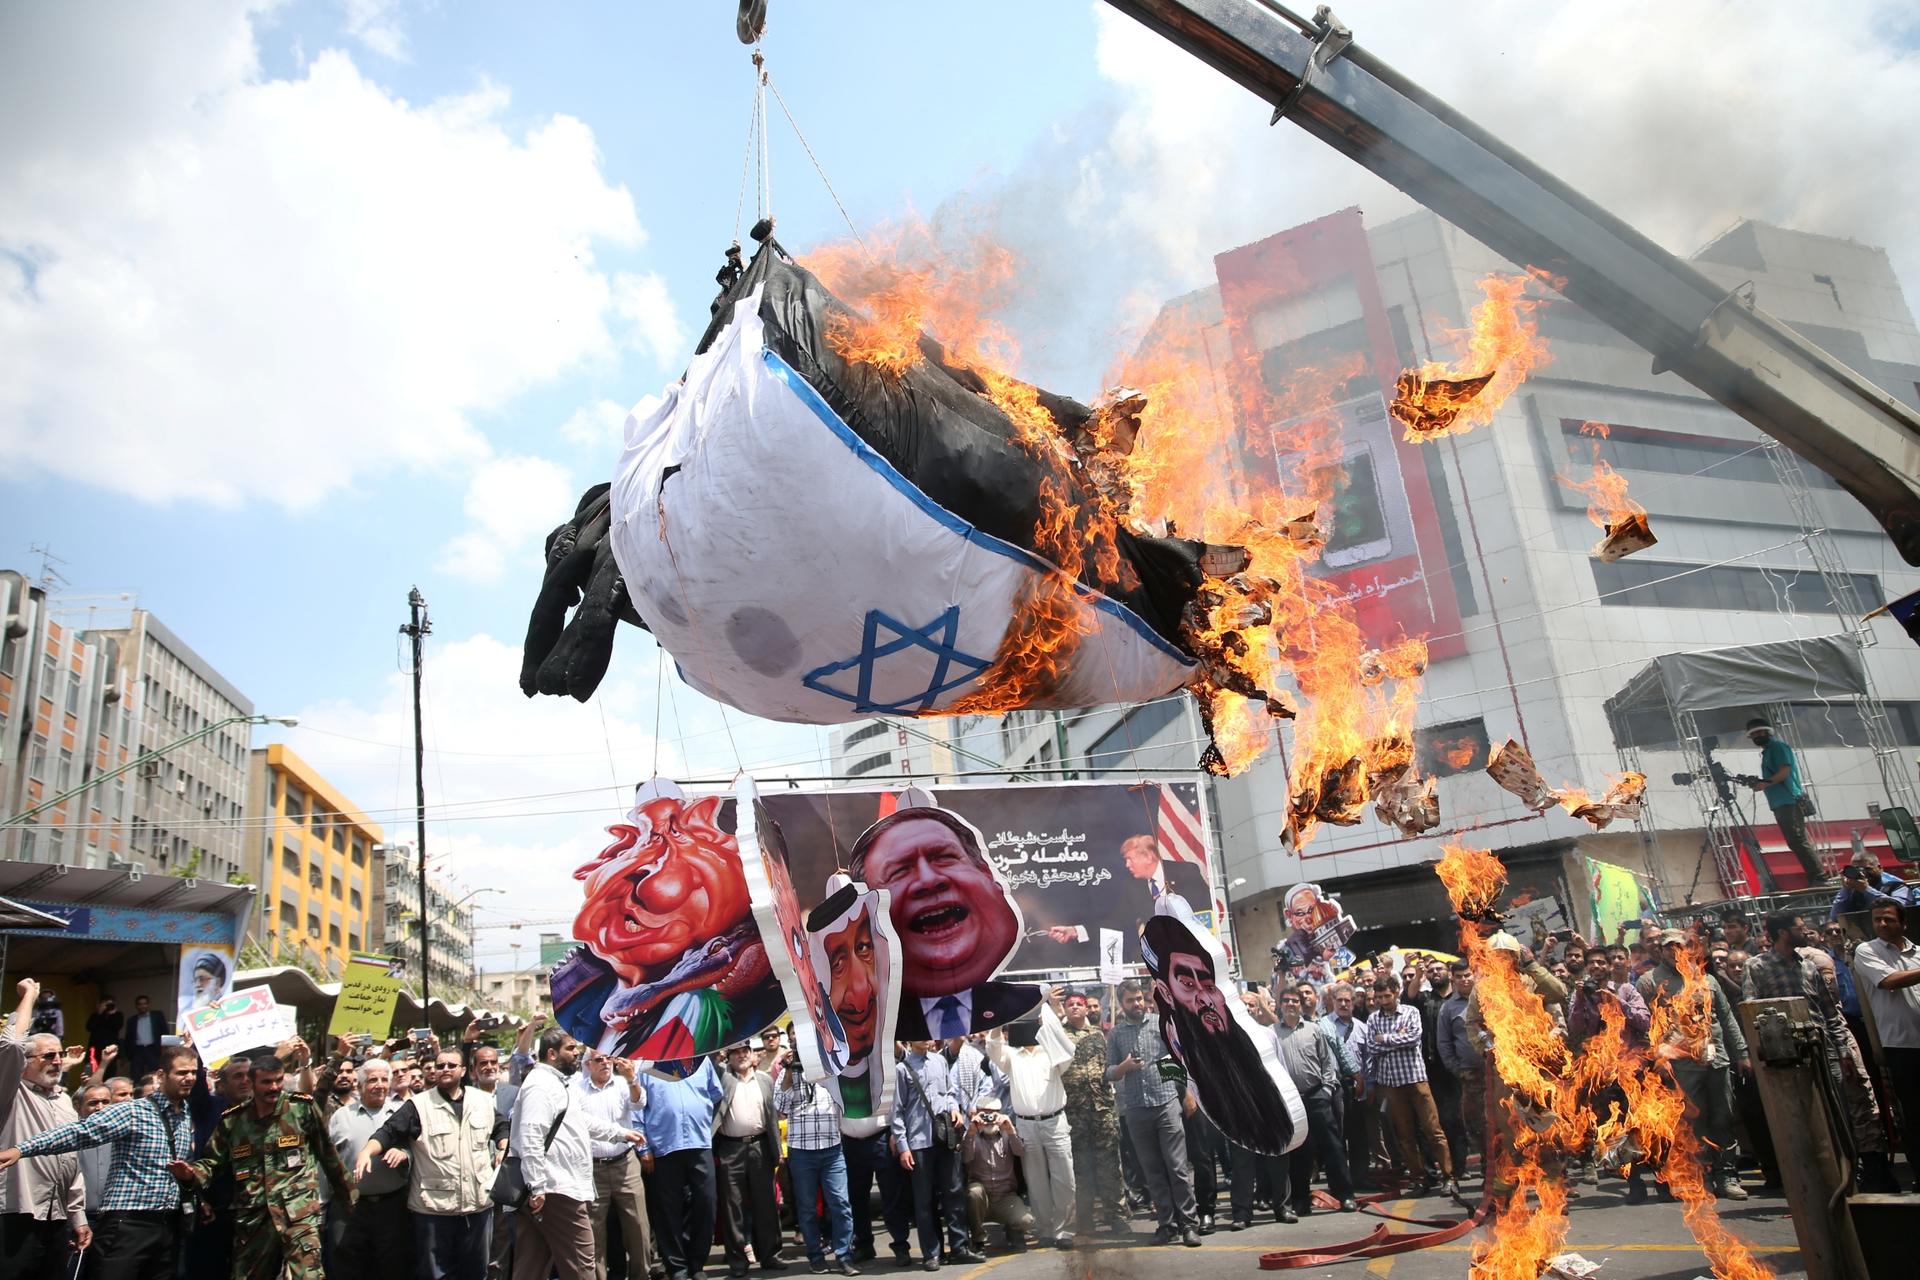 Iranians burn an Israeli flag during a protest marking the annual al-Quds Day (Jerusalem Day) on the last Friday of the holy month of Ramadan in Tehran, Iran May 31, 2019. 